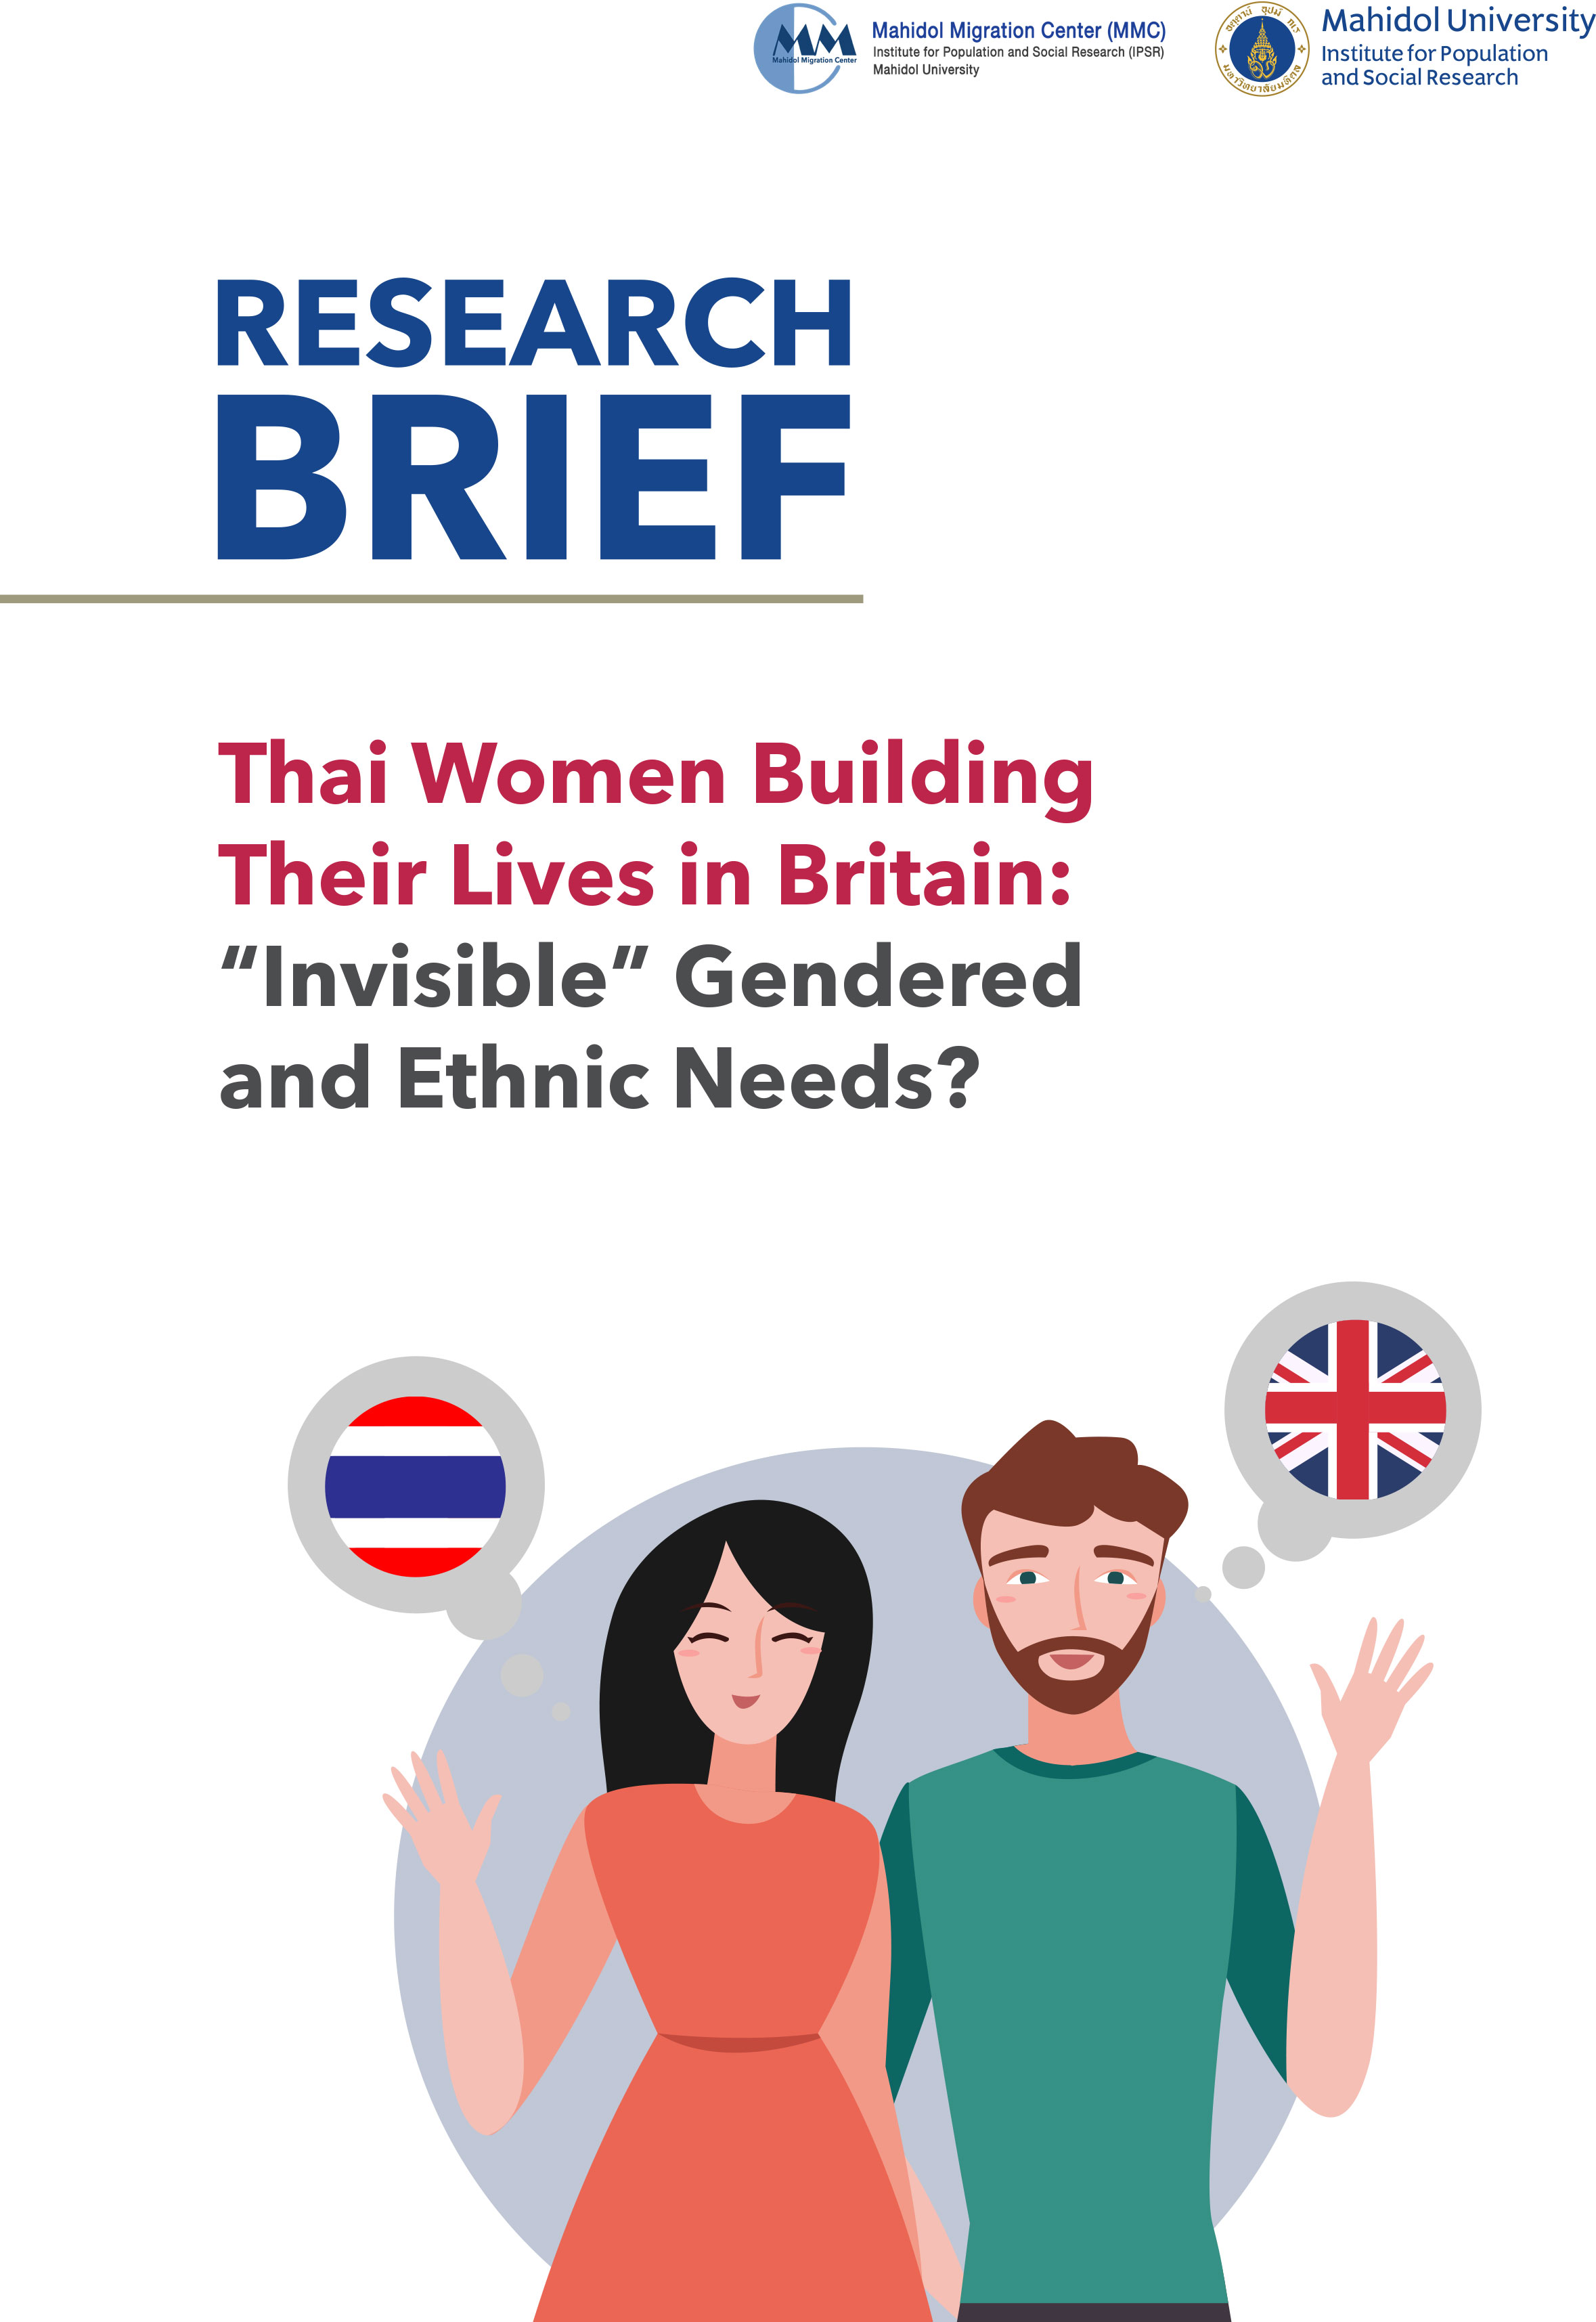 Thai Women Building Their Lives in Britain: “Invisible” Gendered and Ethnic Needs?